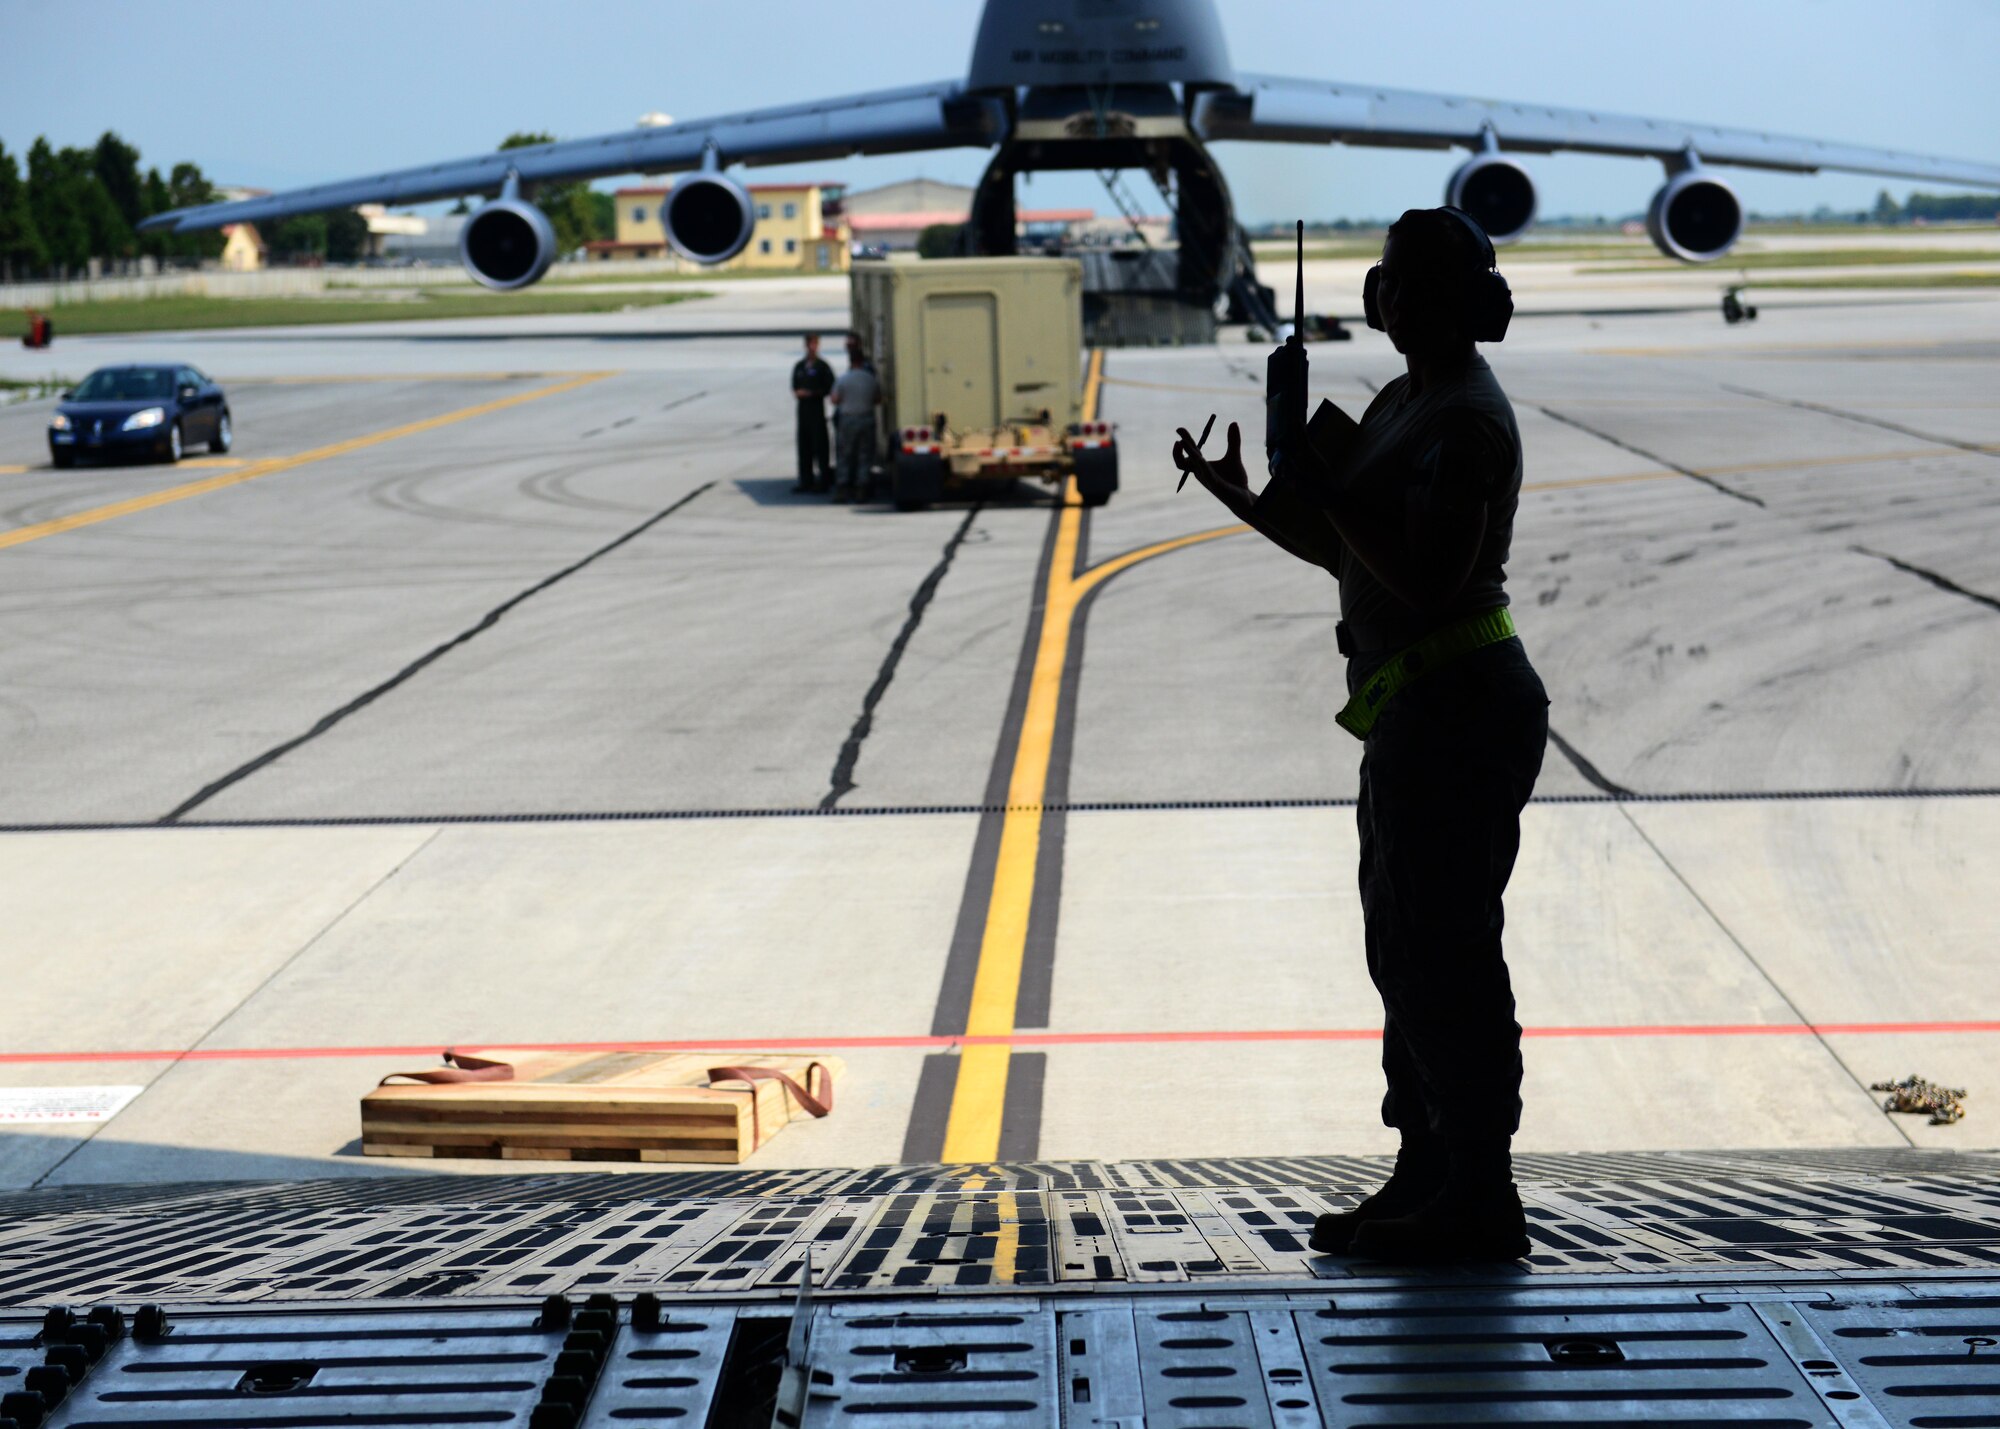 An Airman from the 724th Air Mobility Squadron oversees cargo loading procedures on a C-5 Super Galaxy delivering cargo in support of Operation Inherent Resolve Aug. 8, 2015, at Aviano Air Base, Italy. This deployment coincides with Turkey's decision to host U.S. aircraft to conduct counter-ISIL operations. (U.S. Air Force photo by Airman 1st Class Deana Heitzman)